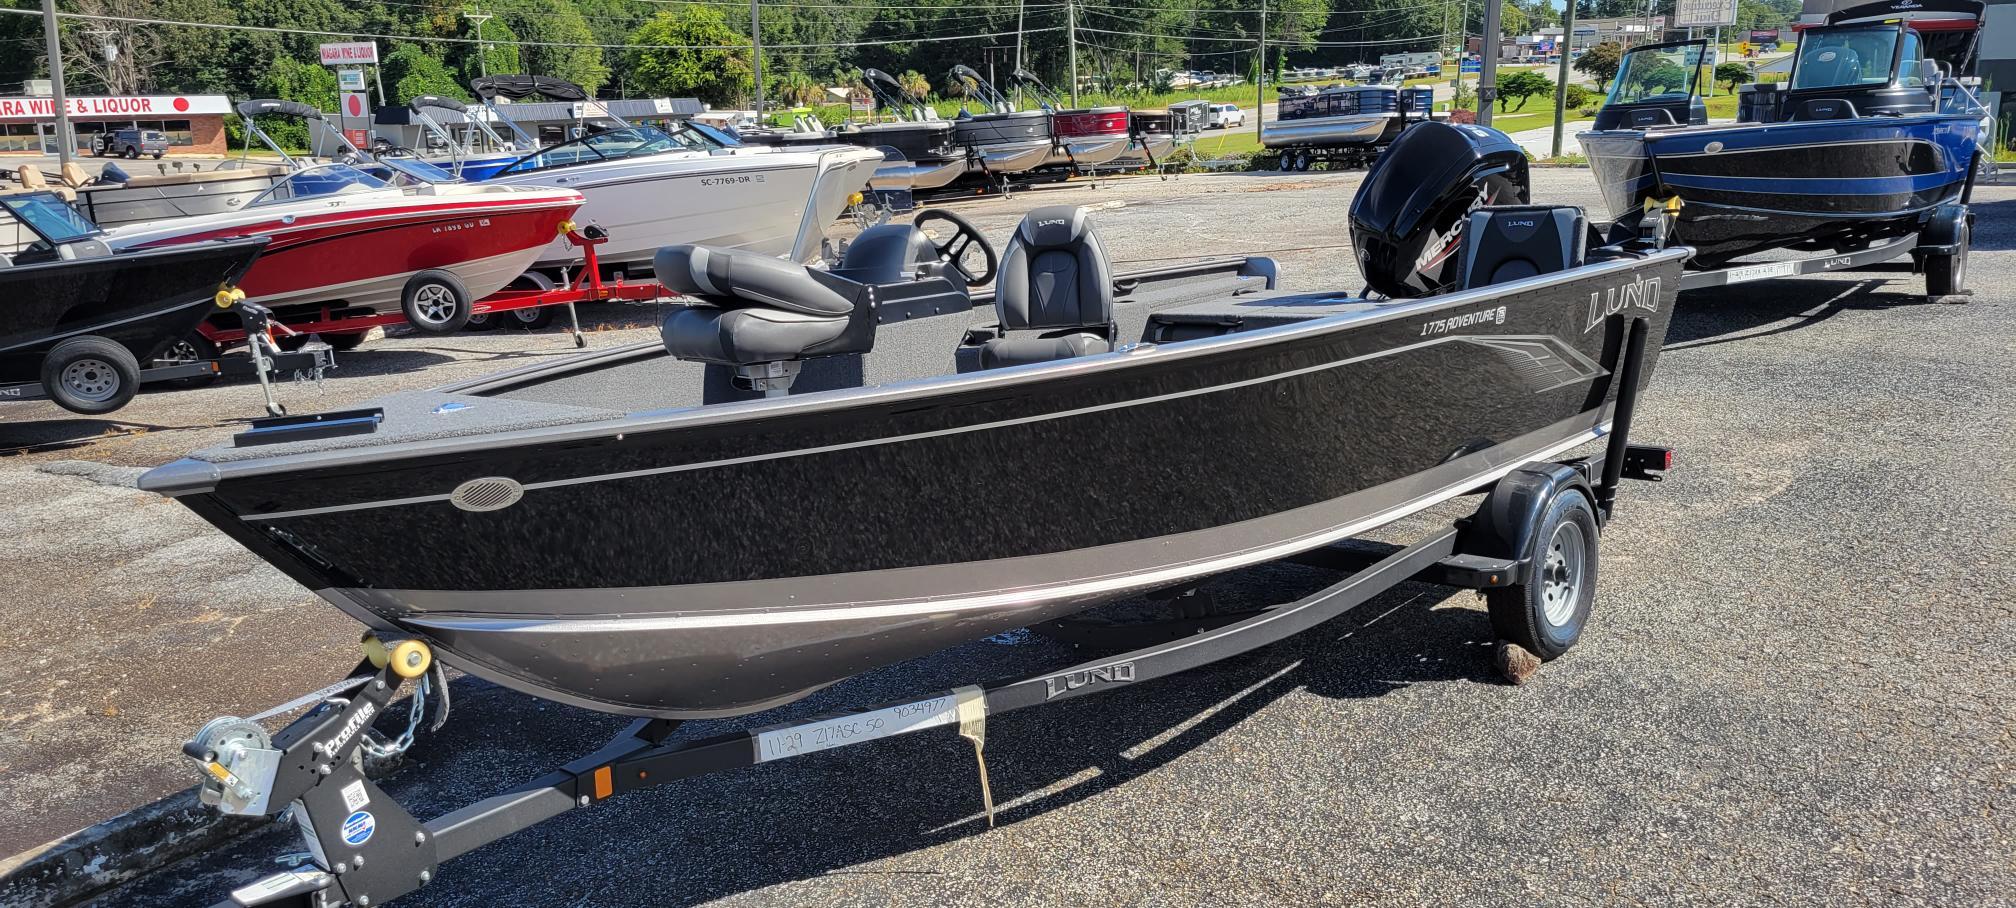 Alumacraft Boats: Unrivaled Performance and Quality for Avid